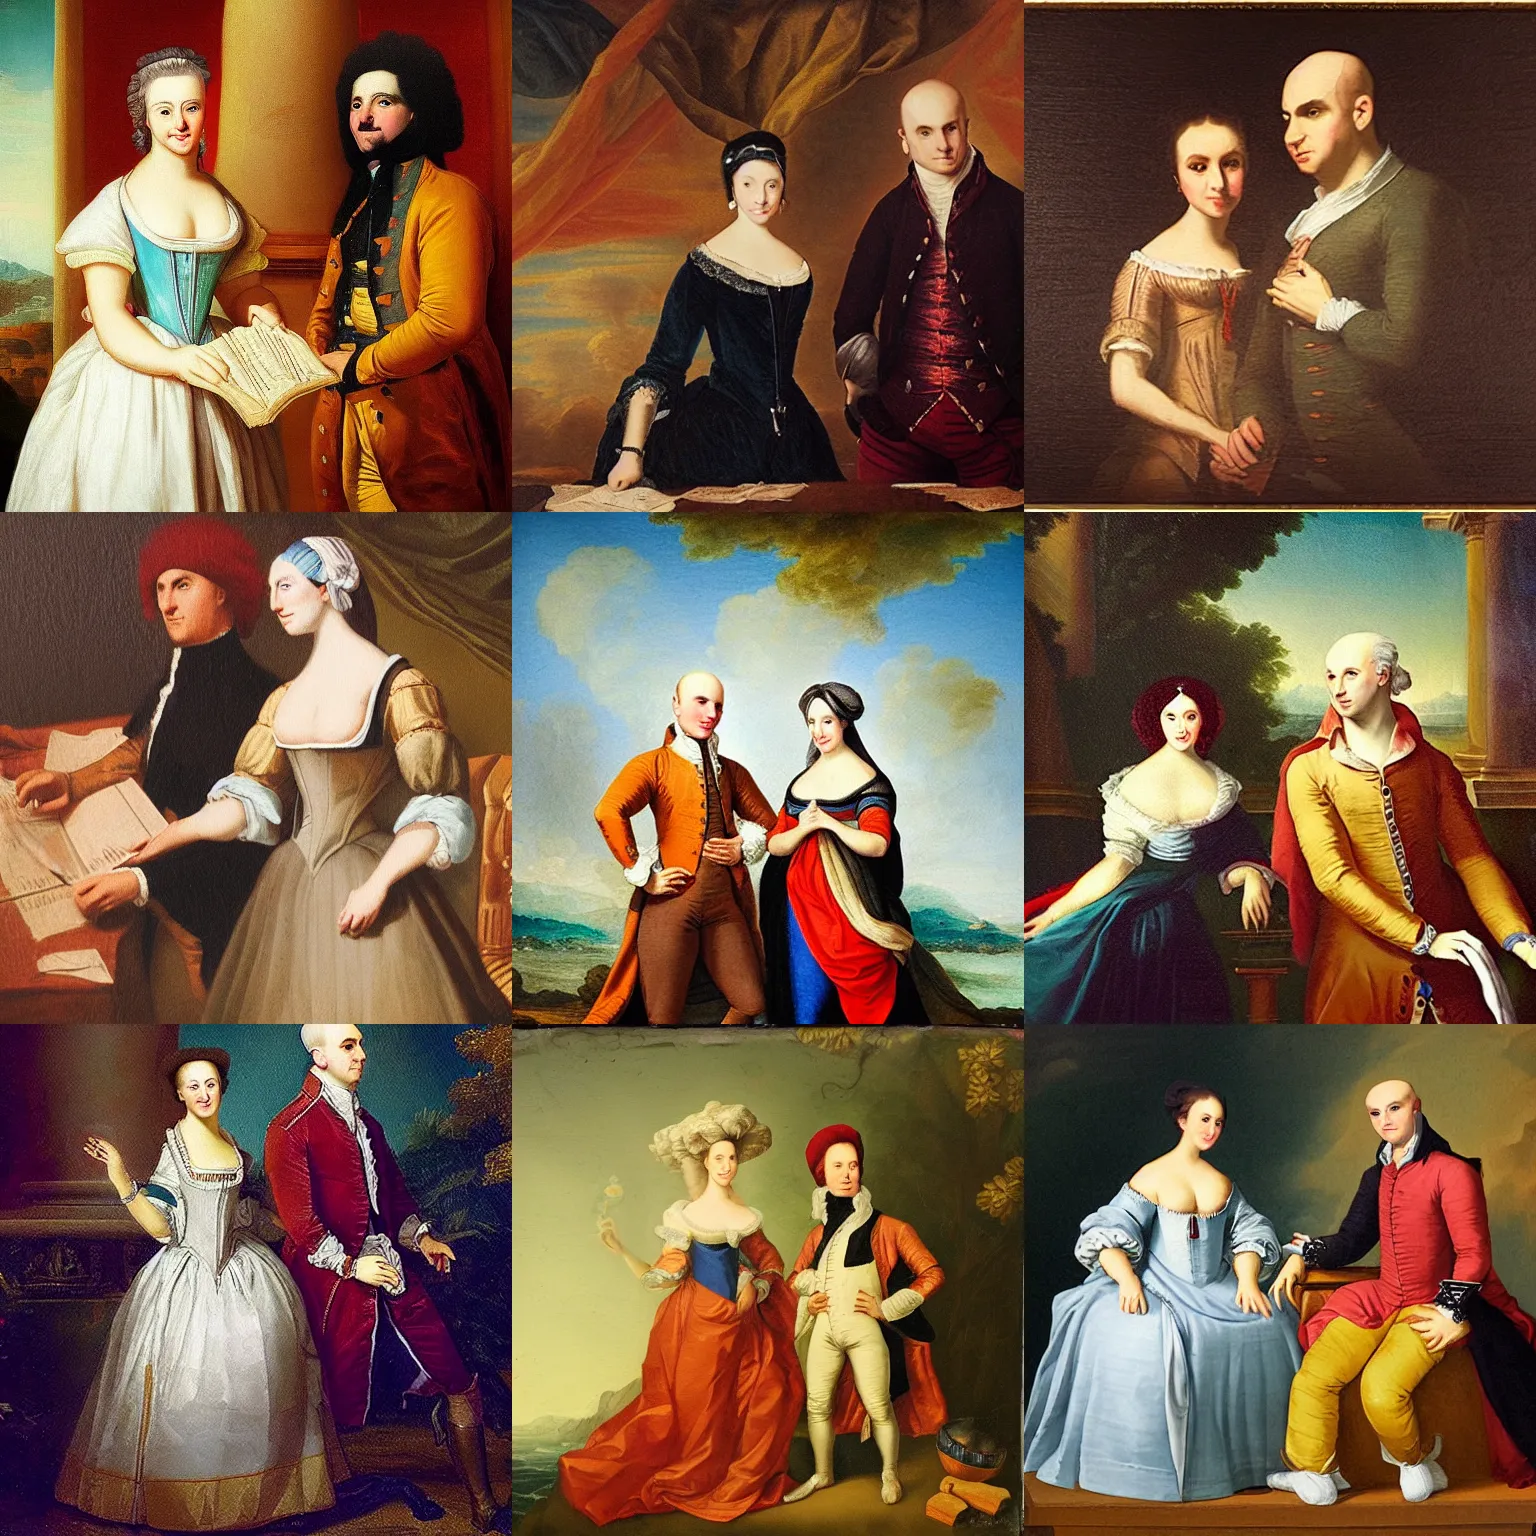 Prompt: Aly & Fila as an 18th century painting